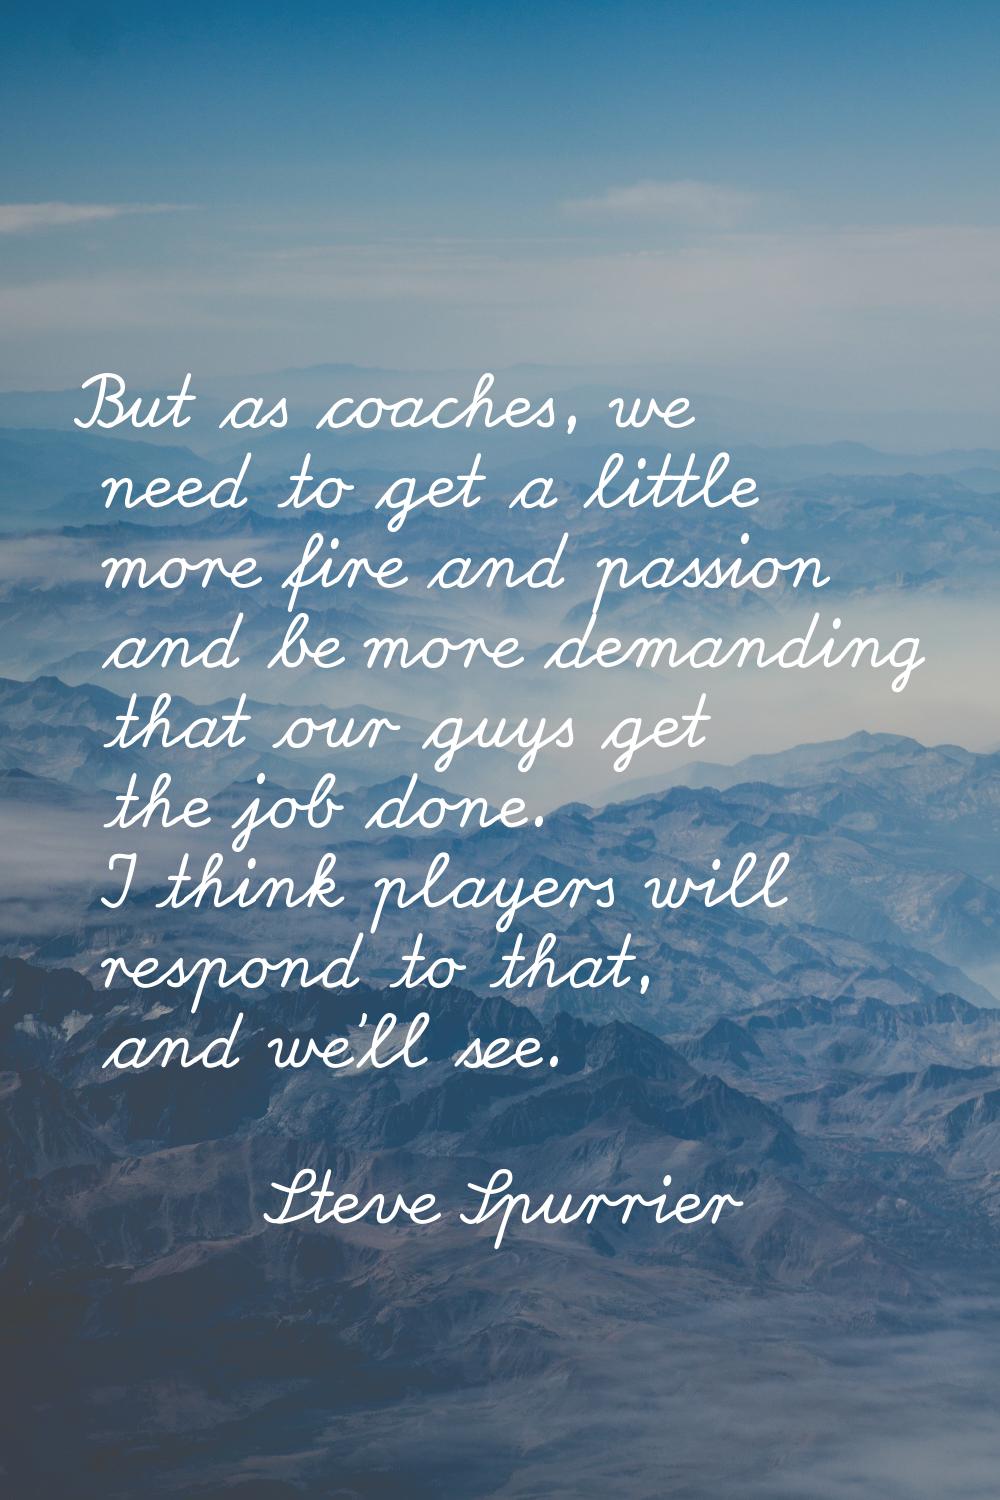 But as coaches, we need to get a little more fire and passion and be more demanding that our guys g